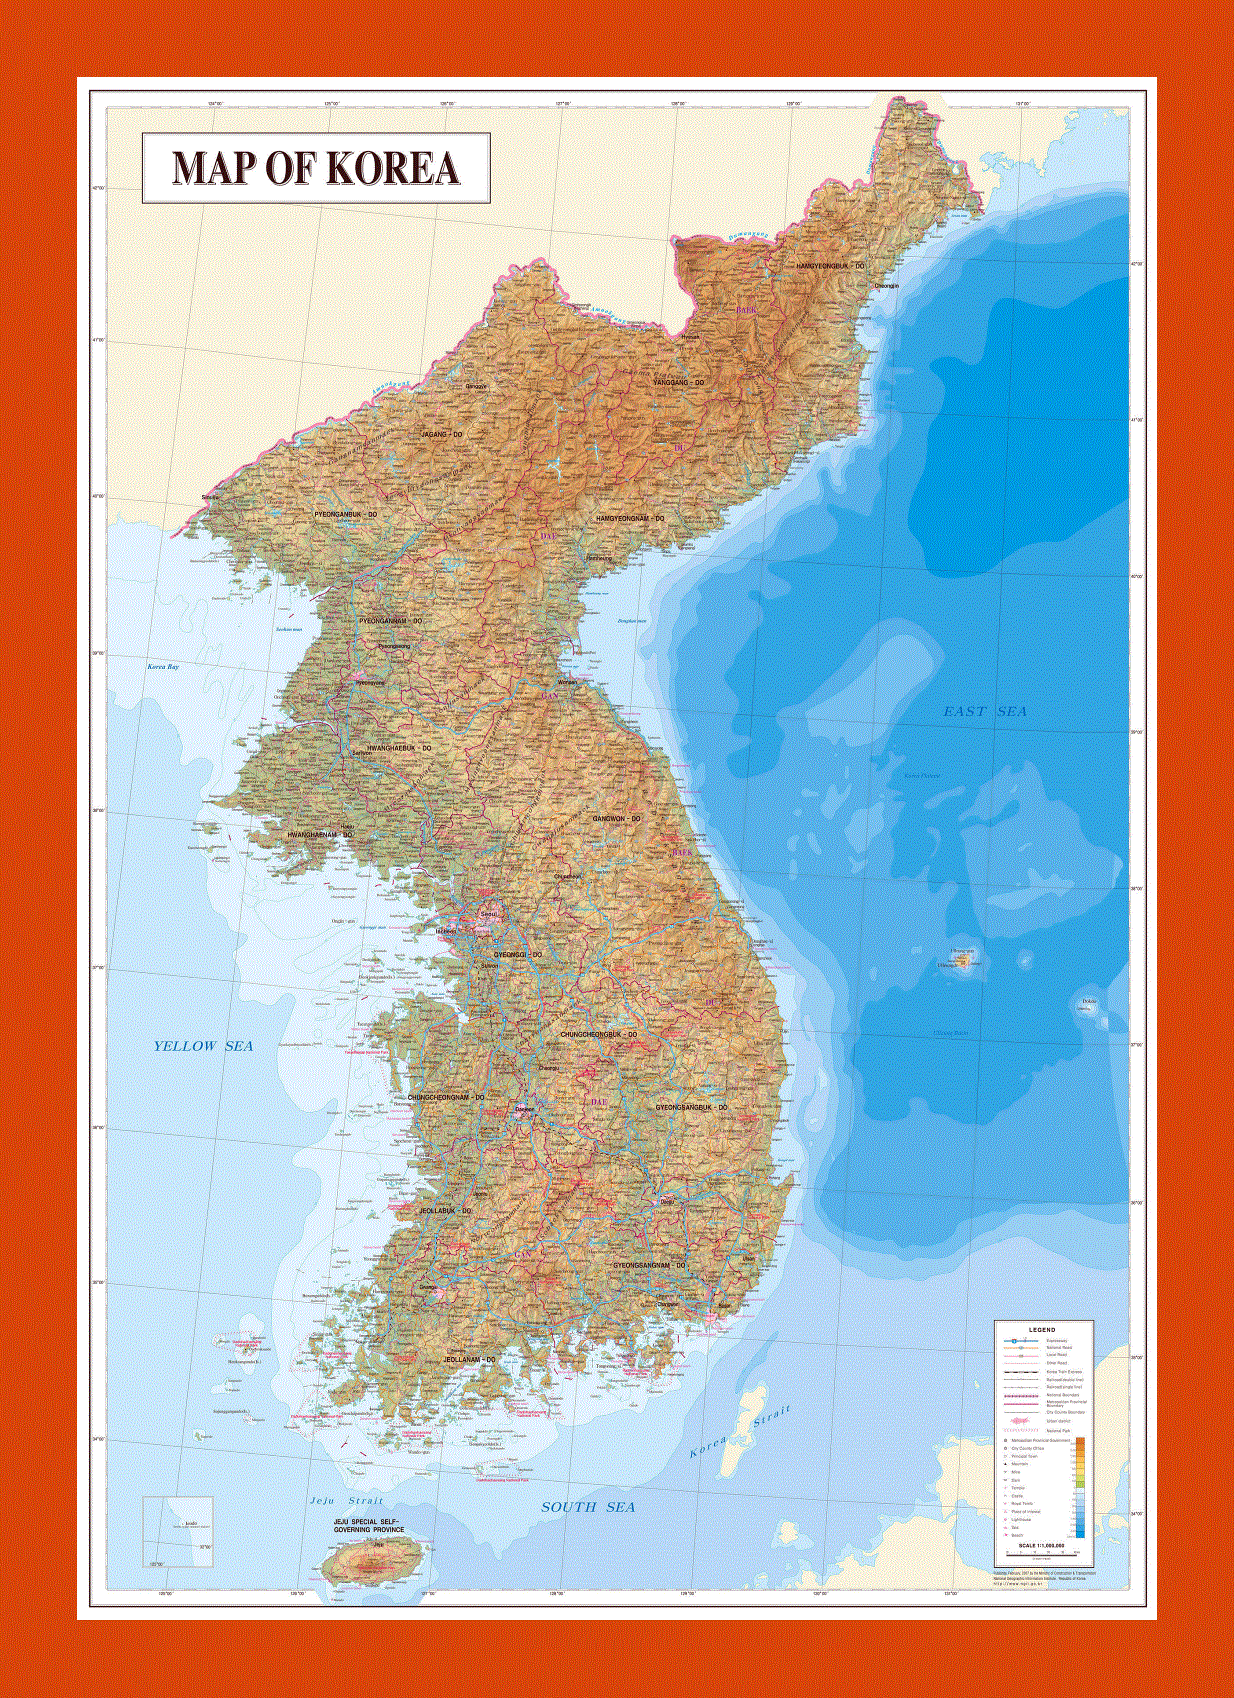 Topography and geology map of Korean Peninsula